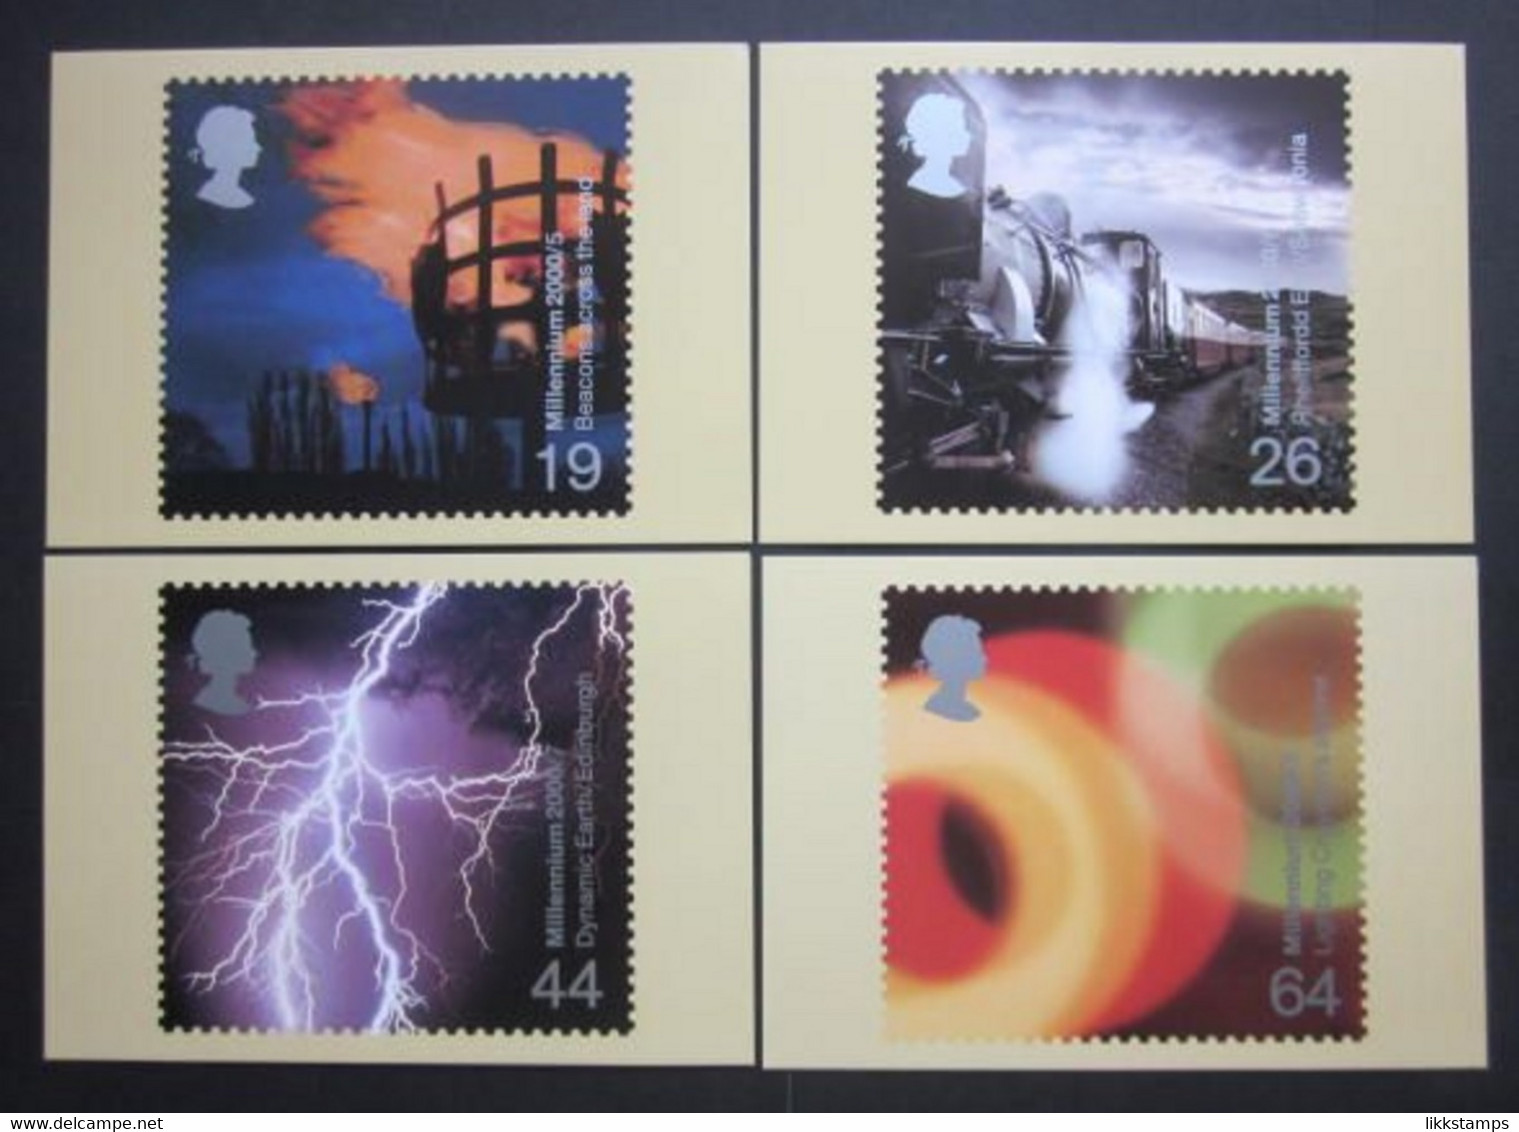 2000 'FIRE AND LIGHT' P.H.Q. CARDS UNUSED, ISSUE No. 216 (B) #00913 - Cartes PHQ